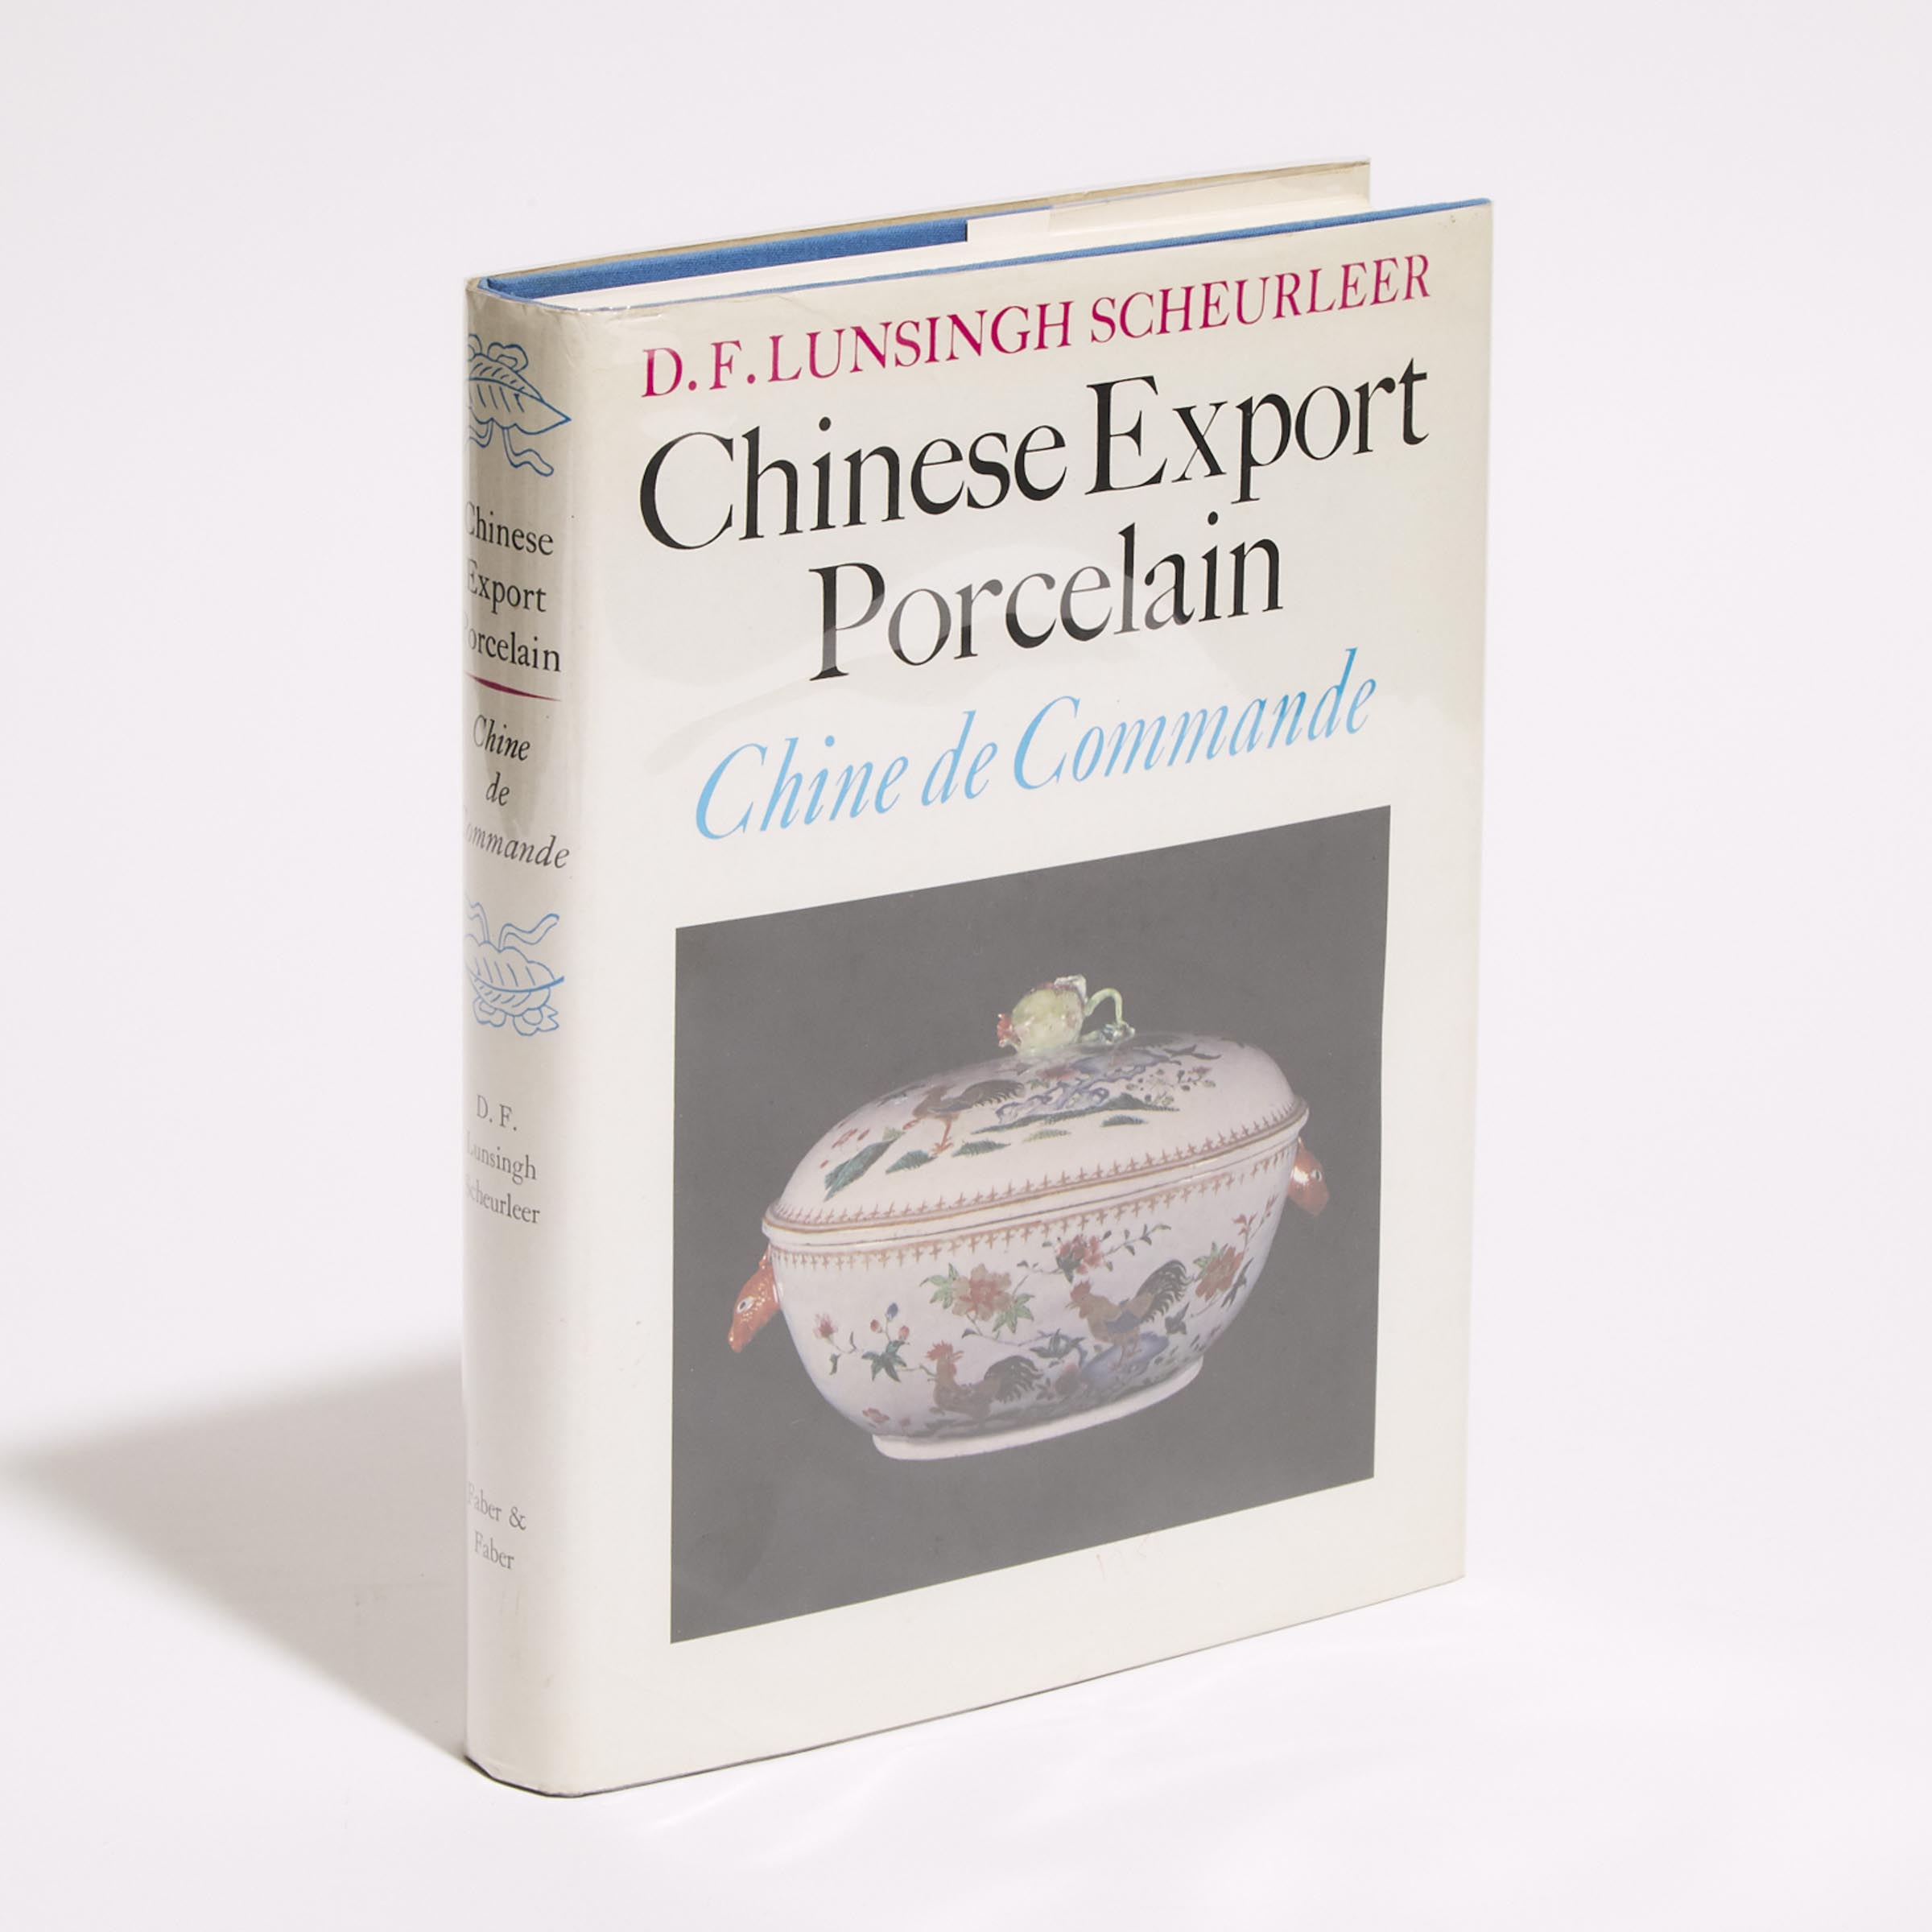 D.F. Lunsingh Scheurleer, Chinese Export Porcelain, Faber and Faber Ltd., 1974